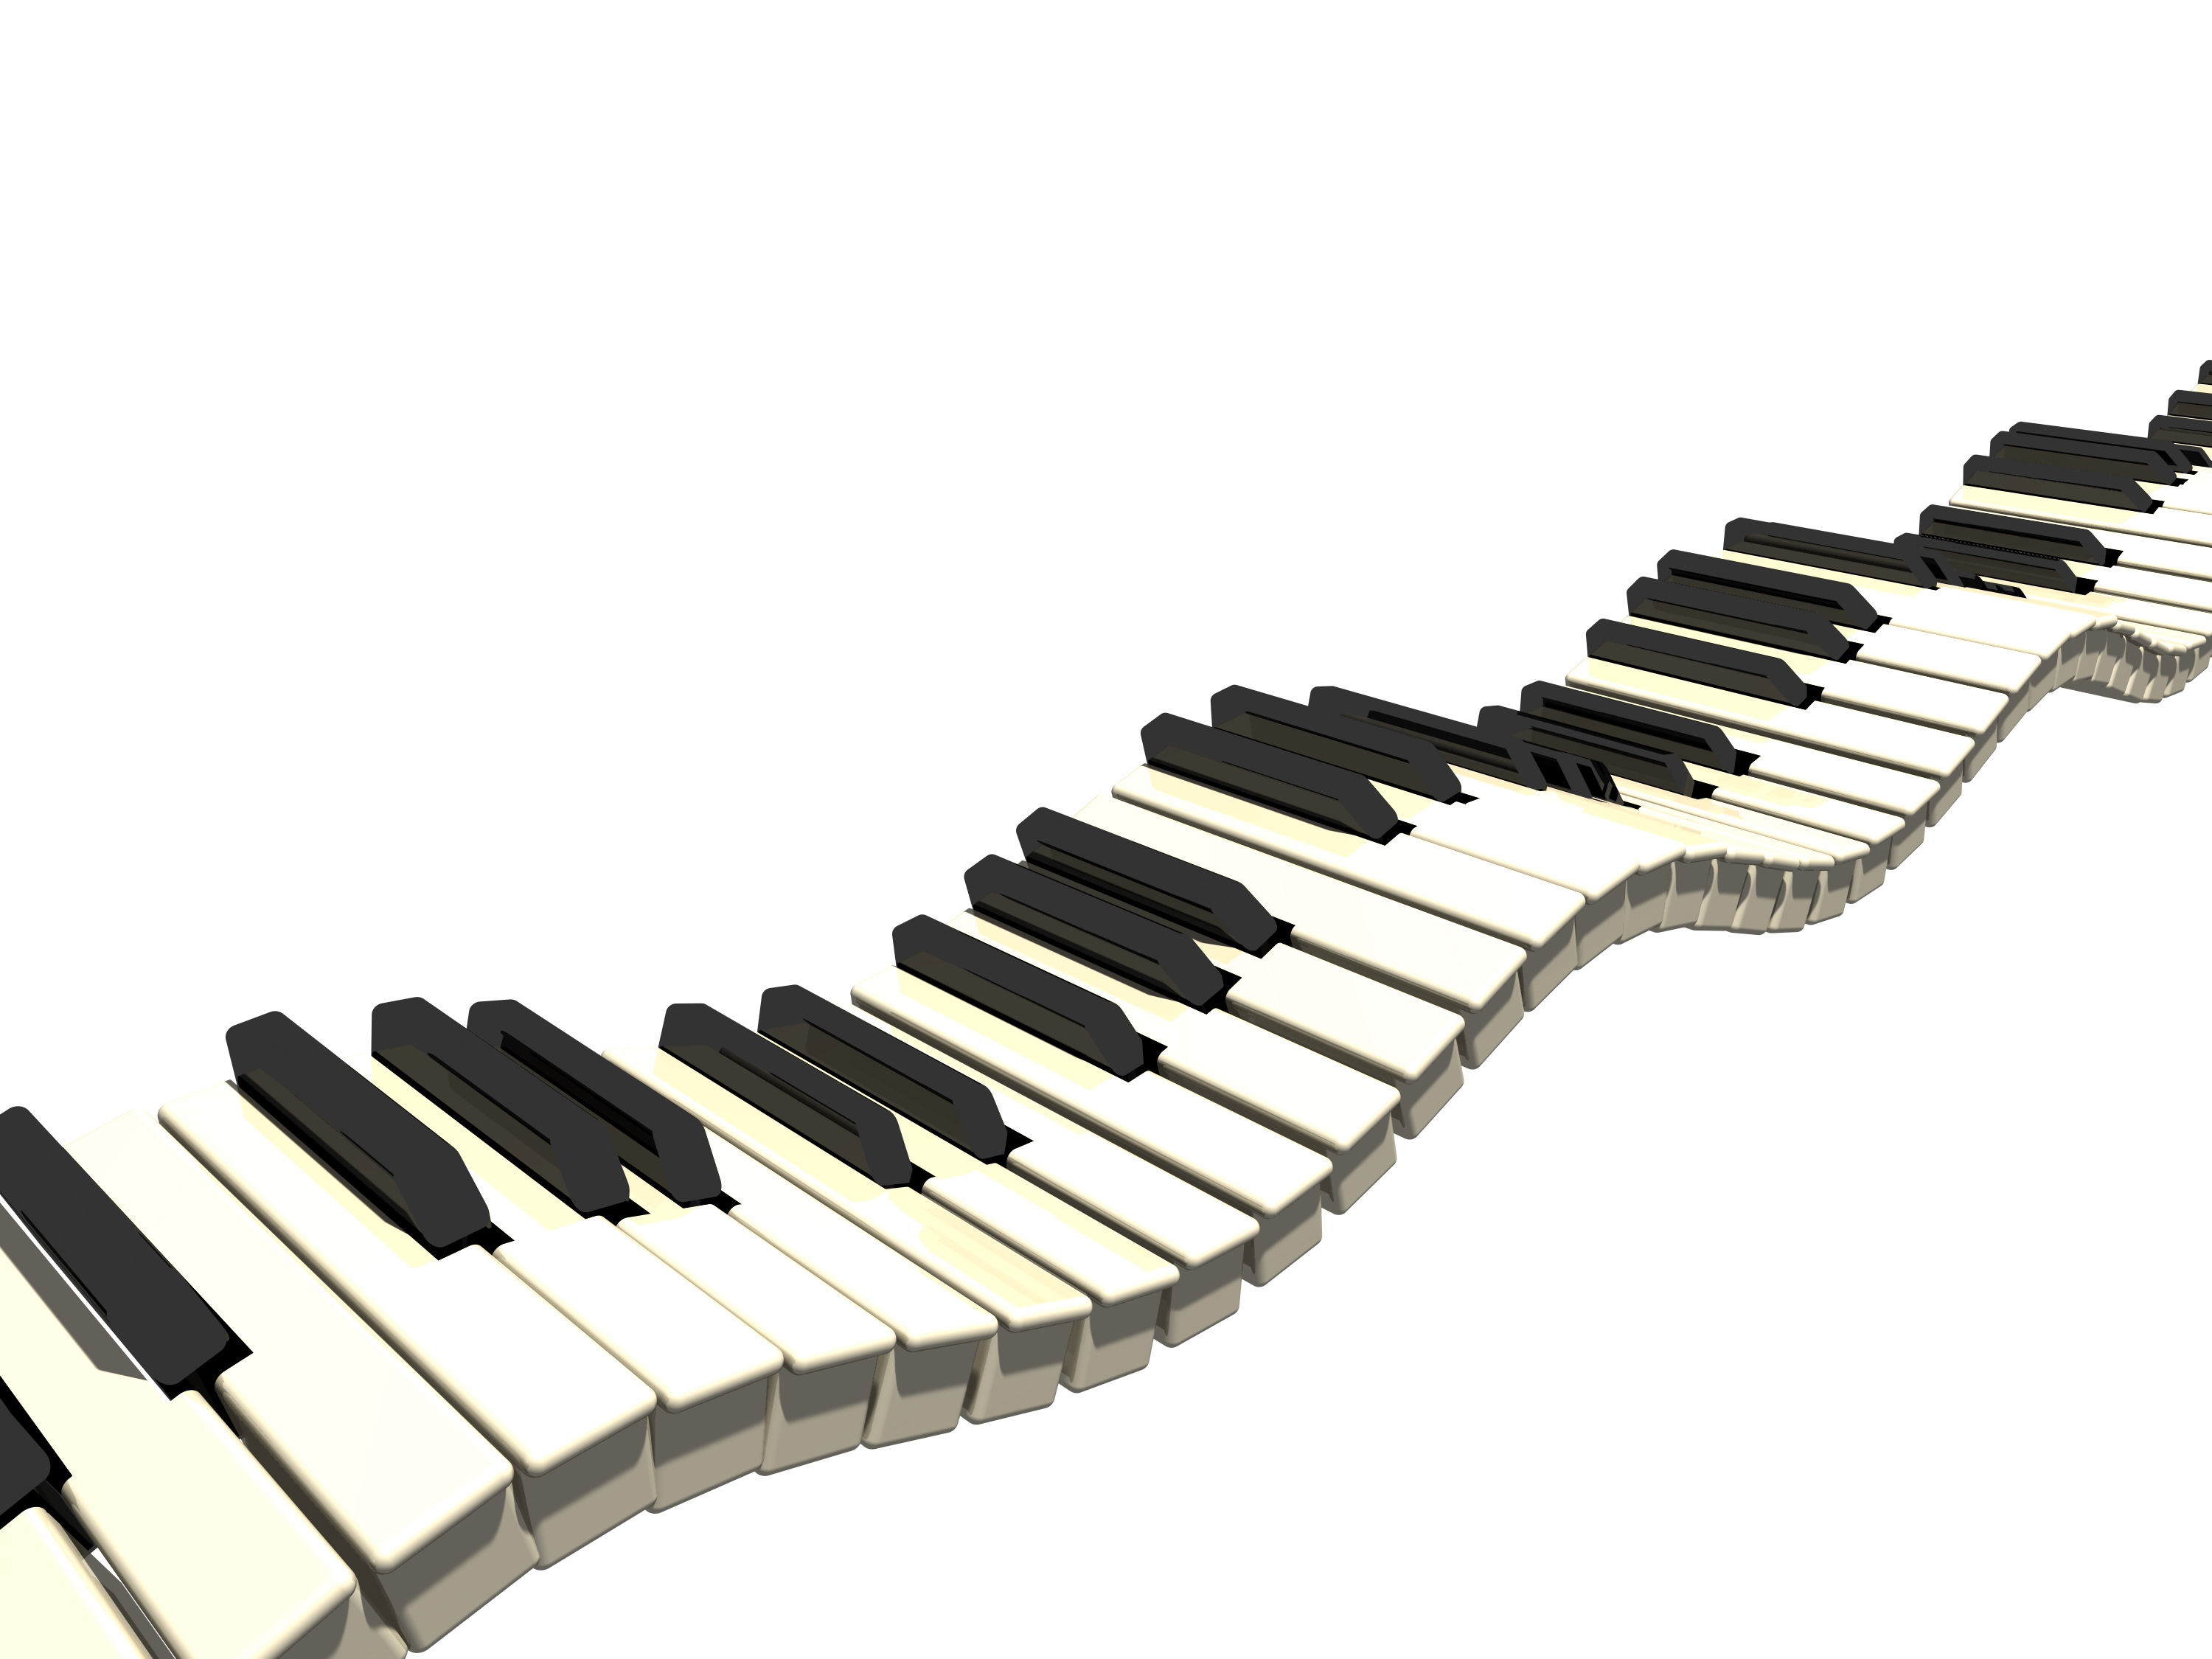 Piano Keys Clipart images